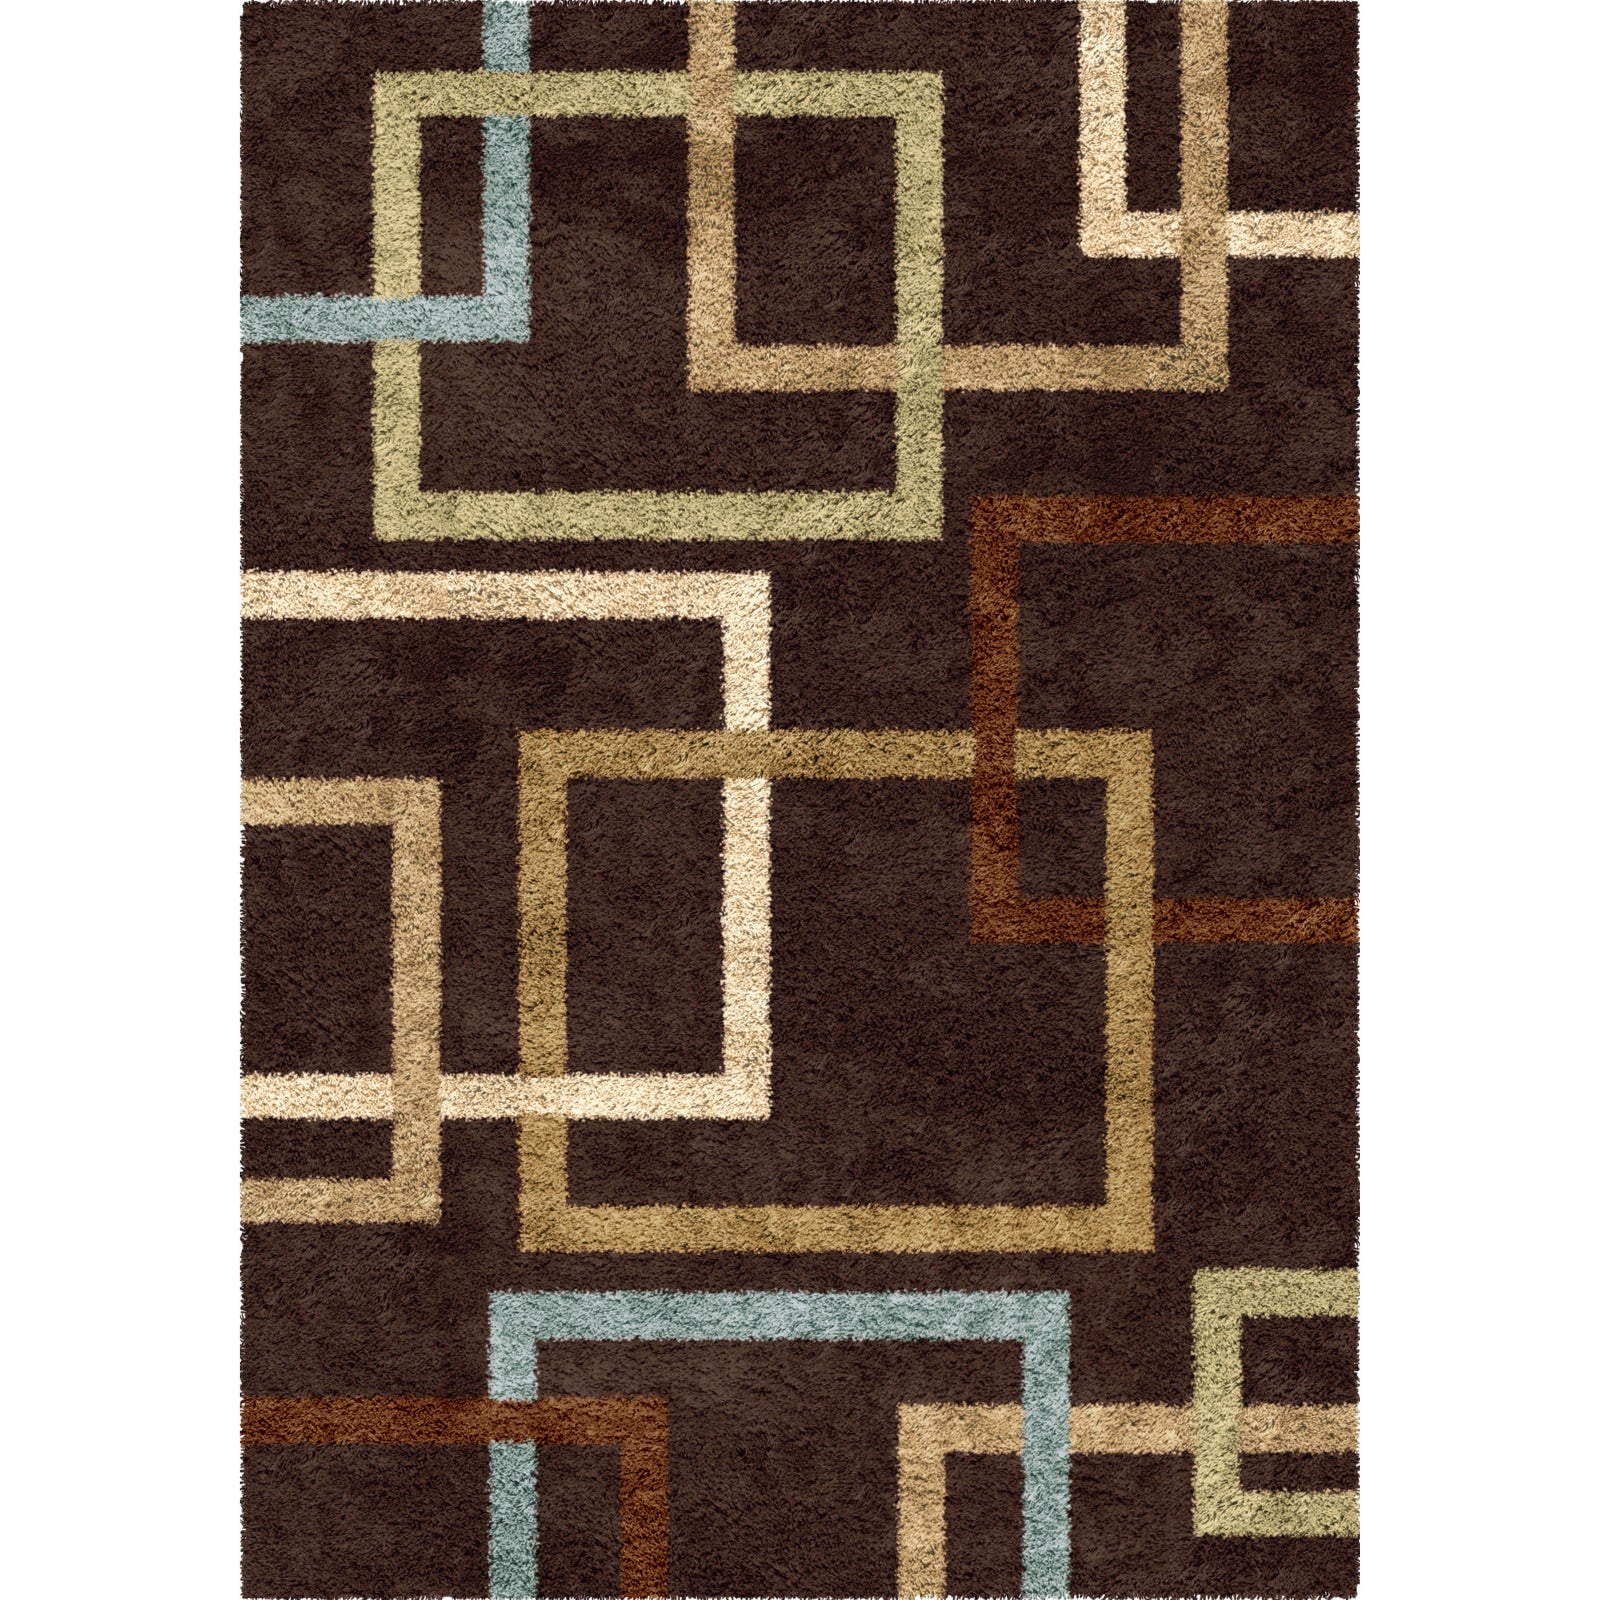 Orian Rugs Oasis Shag Linked-In Brown Area Rug main image